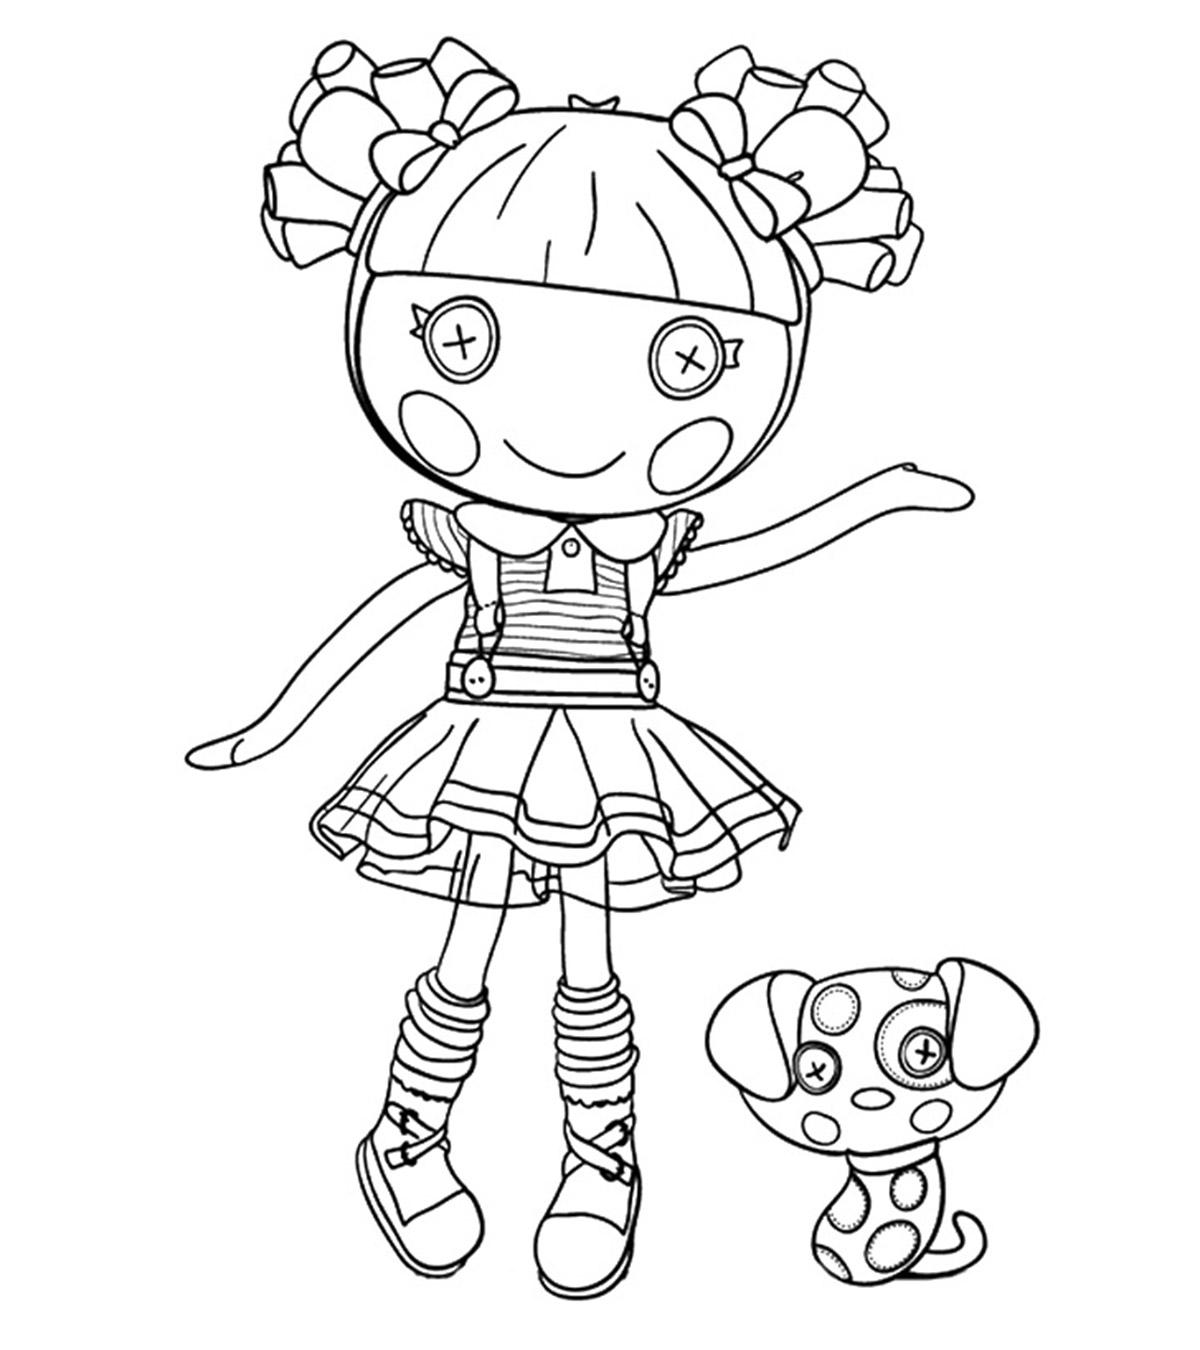 Top 20 Lalaloopsy Coloring Pages Your Toddler Will Love